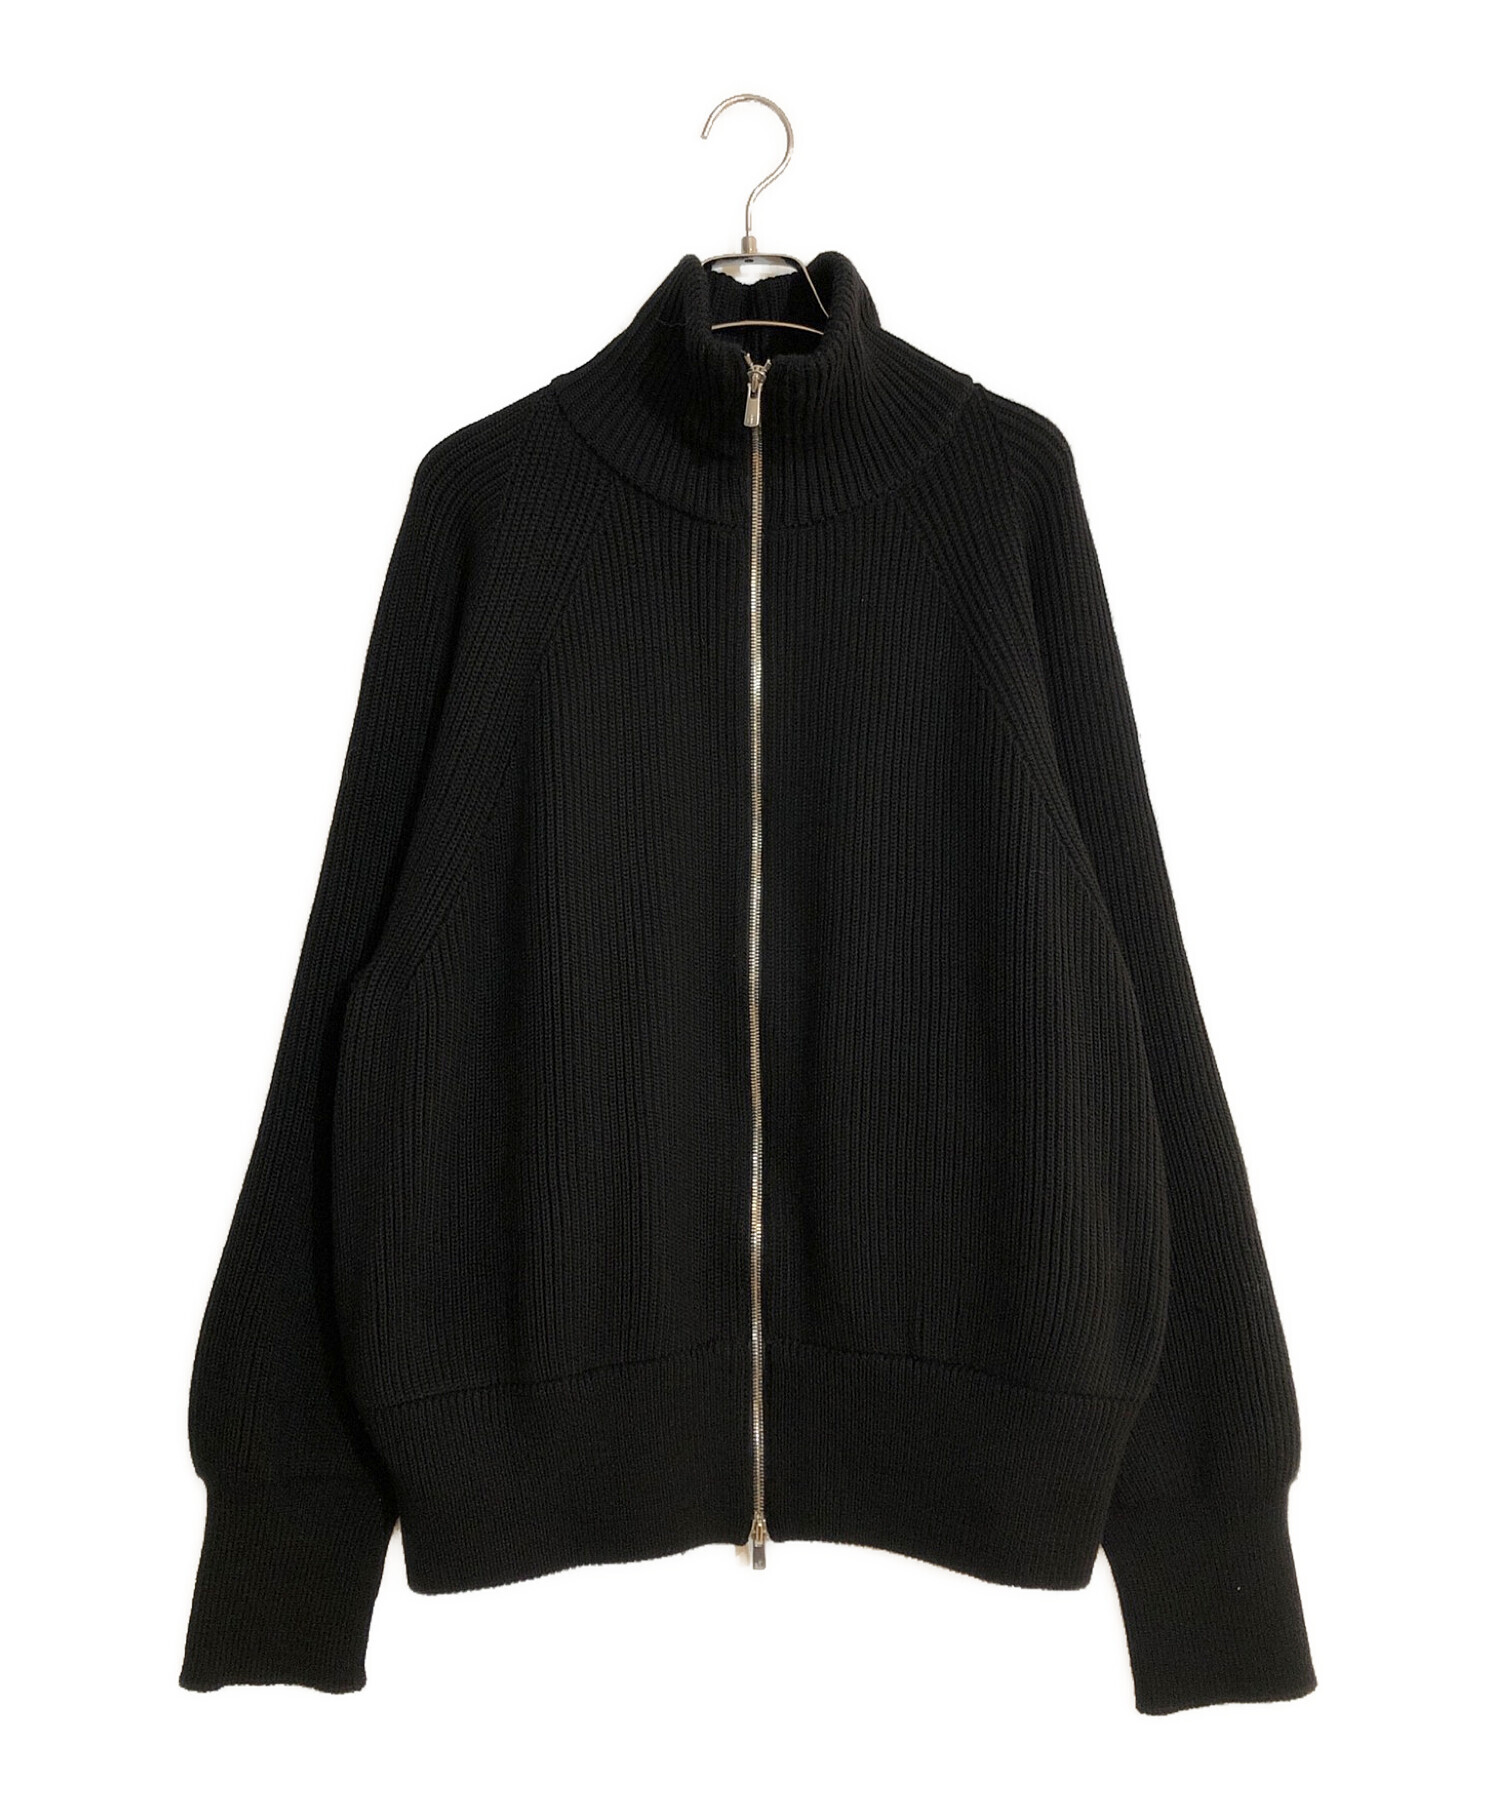 CLESSTE OVERSIZED HIGH NECK DRIVERS KNIT考えておりません